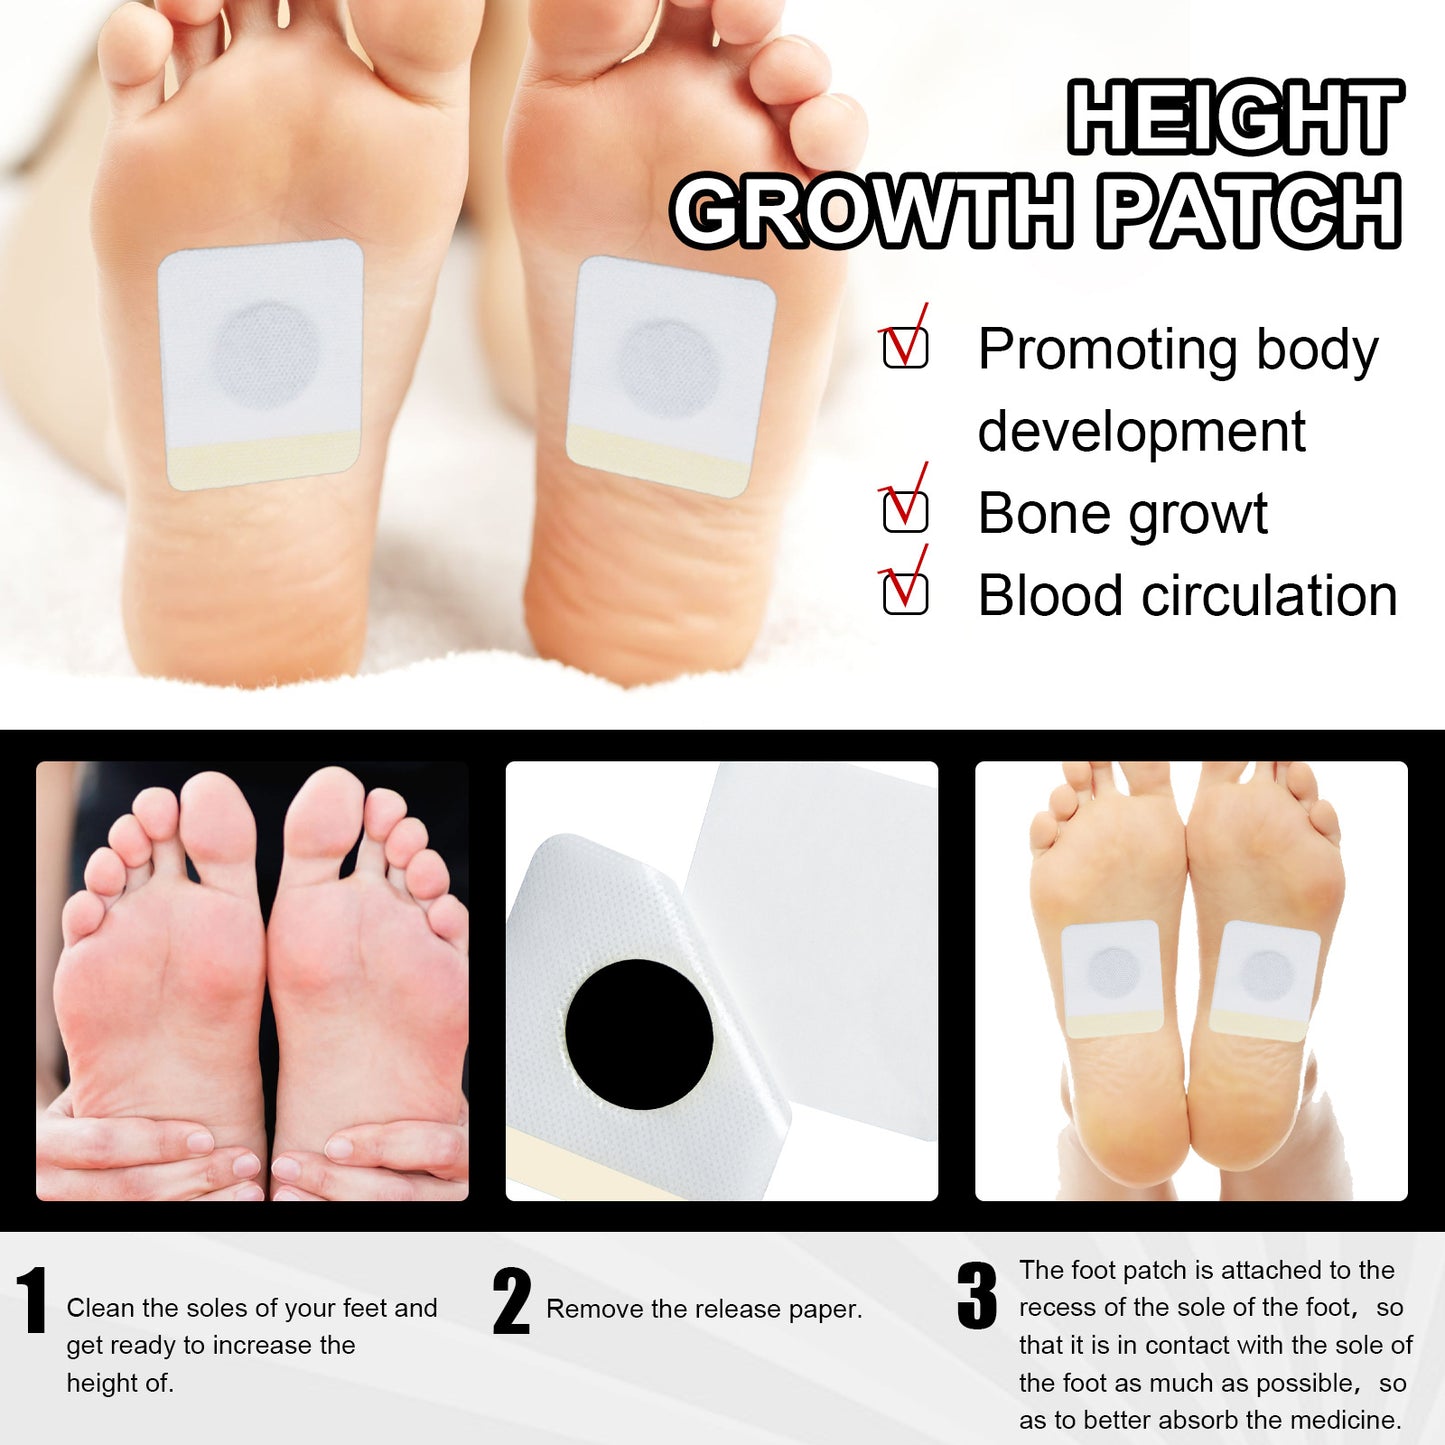 EELHOE Foot Patch for Adult and Child Height Enhancer Treatment Grow Stimulates Bone (10PCS)